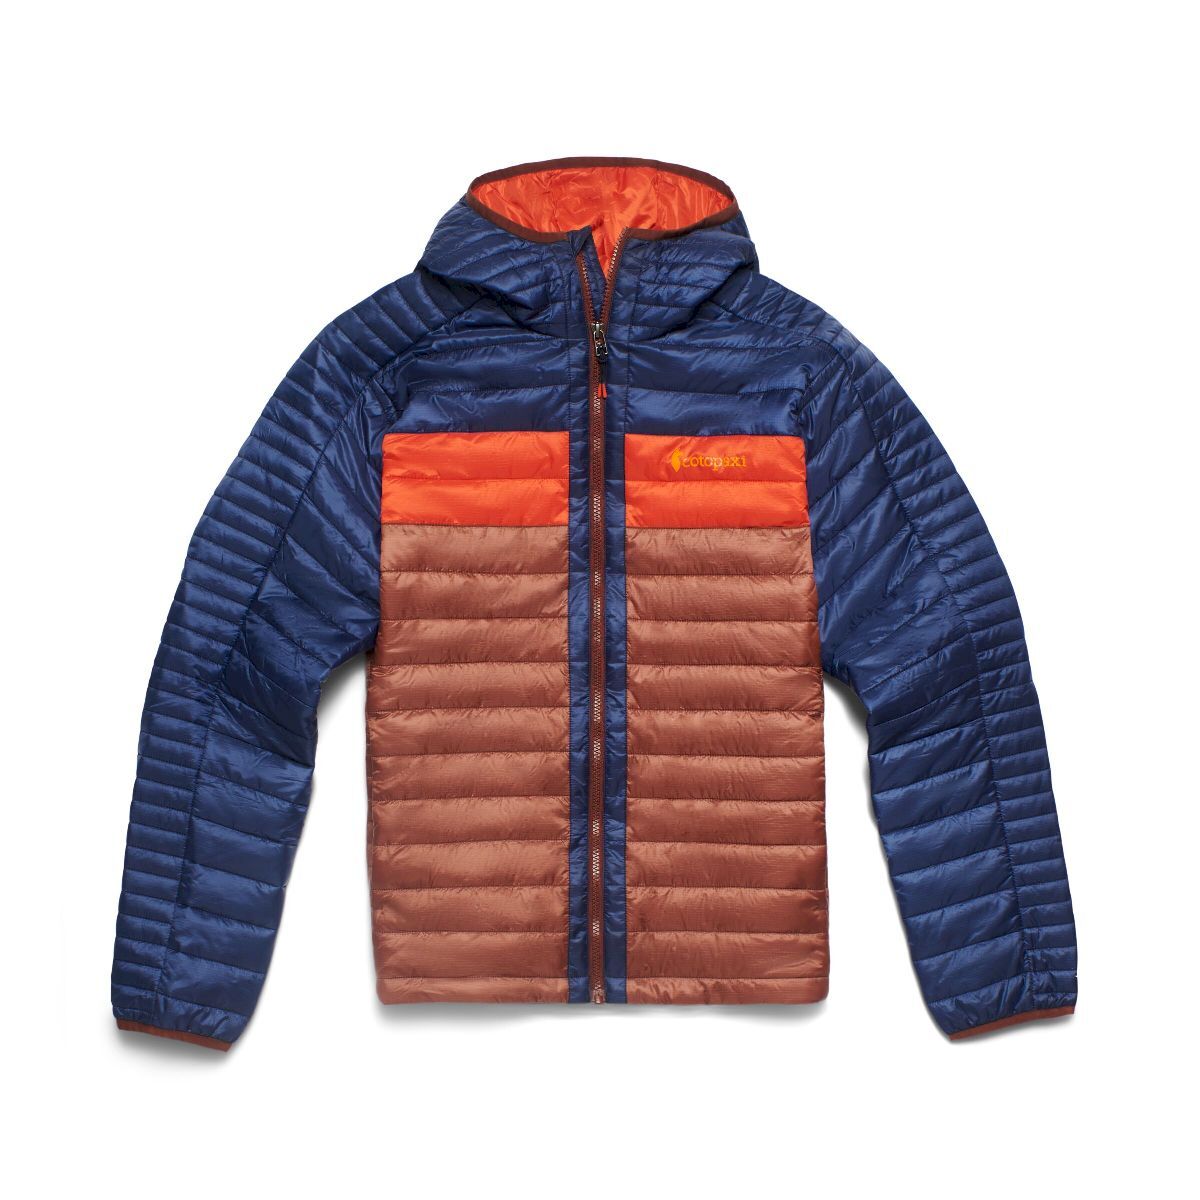 Cotopaxi Capa Insulated Hooded Jacket - Giacca sintetica - Uomo